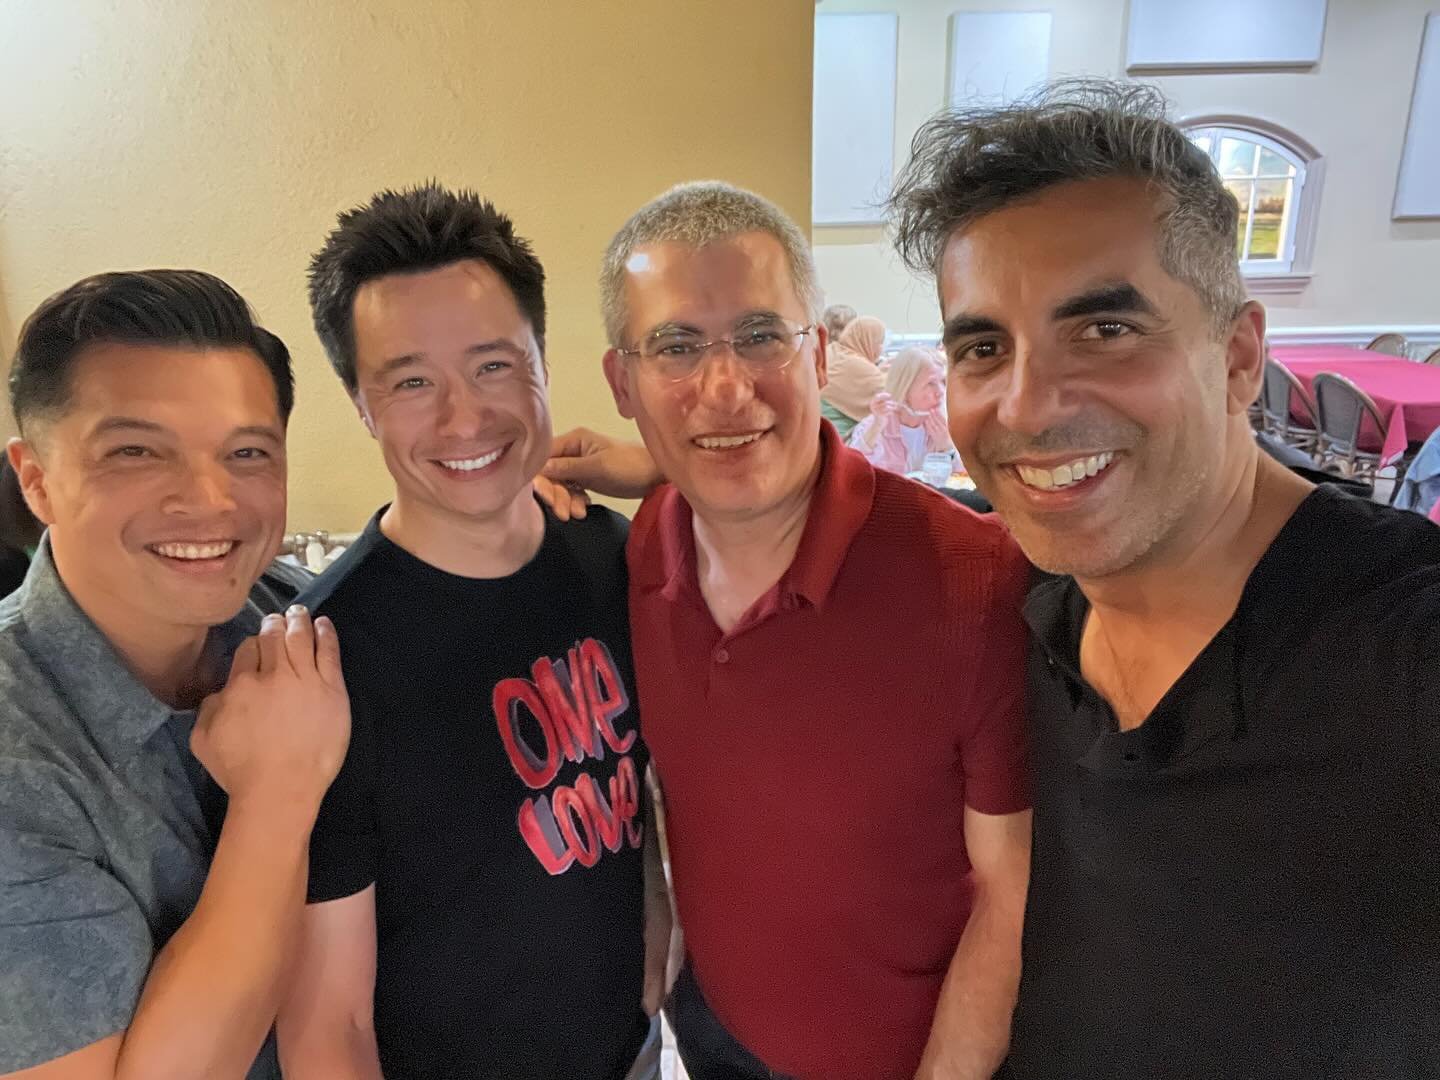 #raiden #kunglao and #liukang hanging with the #eldergods ! Having a great dinner with the oh so talented @vrodrigueziii , @thatsunil and @cianciolo.dominic for some grub and #mortalkombat !!!